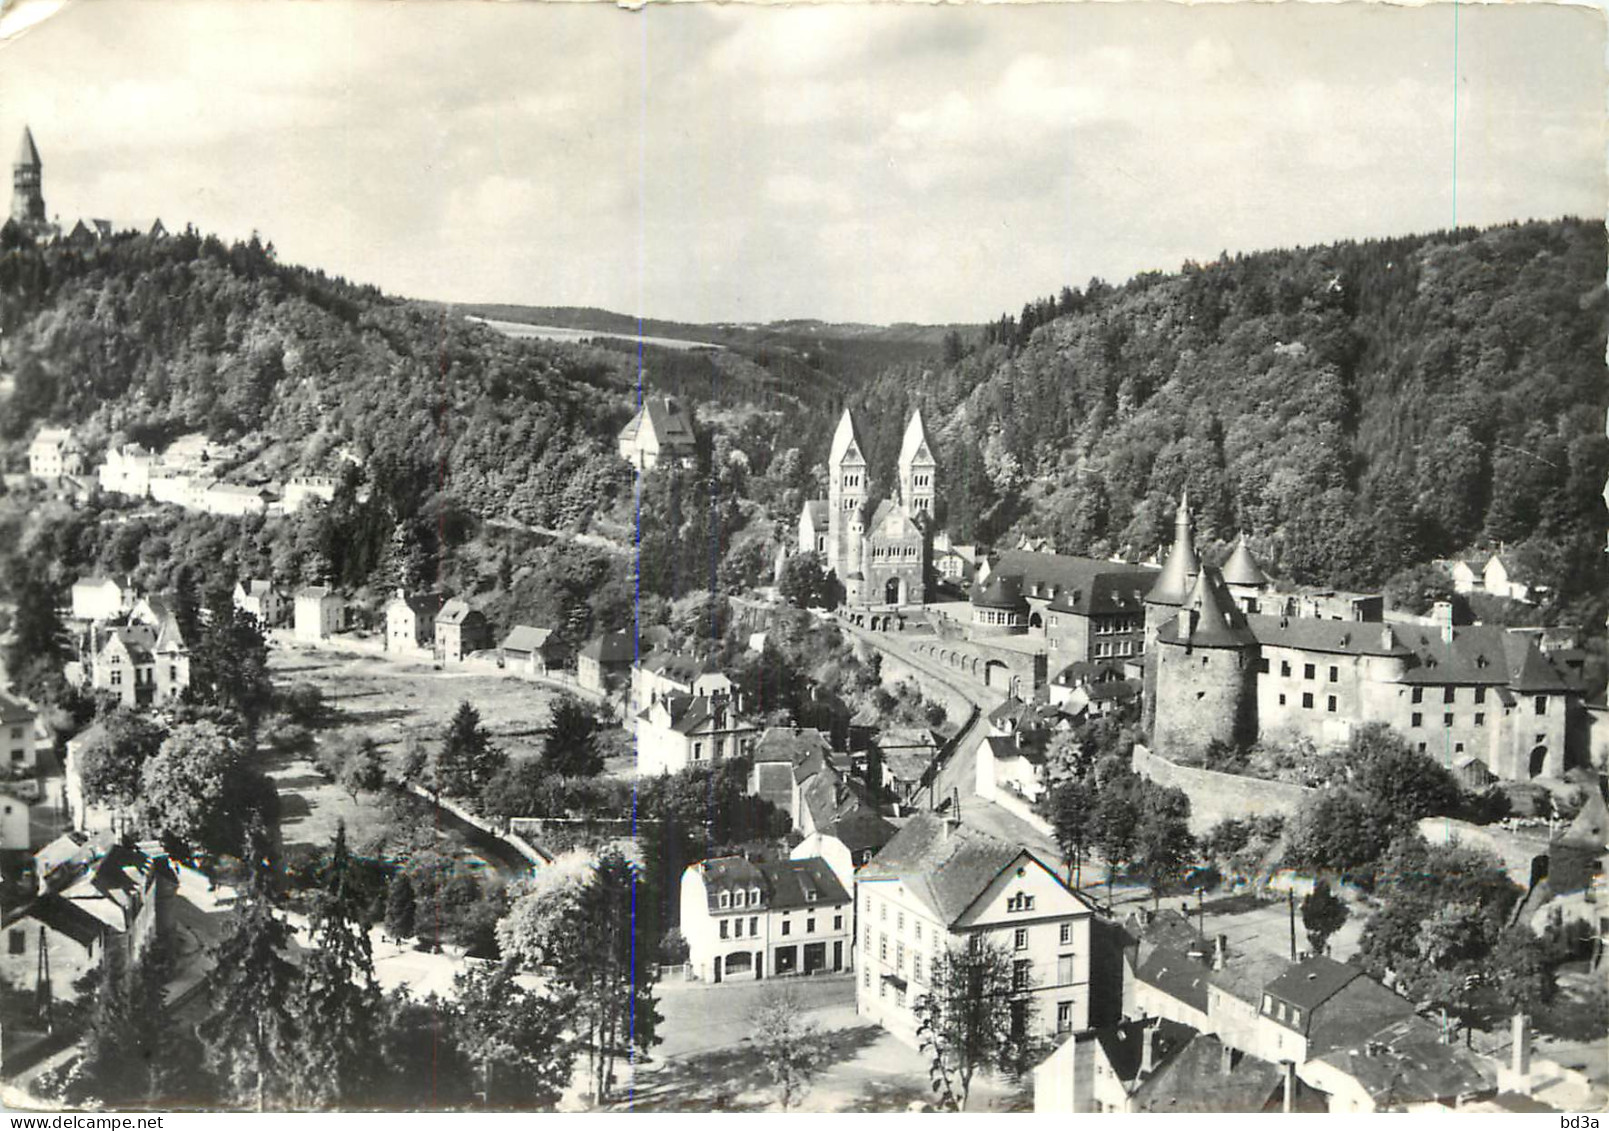  LUXEMBOURG  CLERVAUX - Clervaux